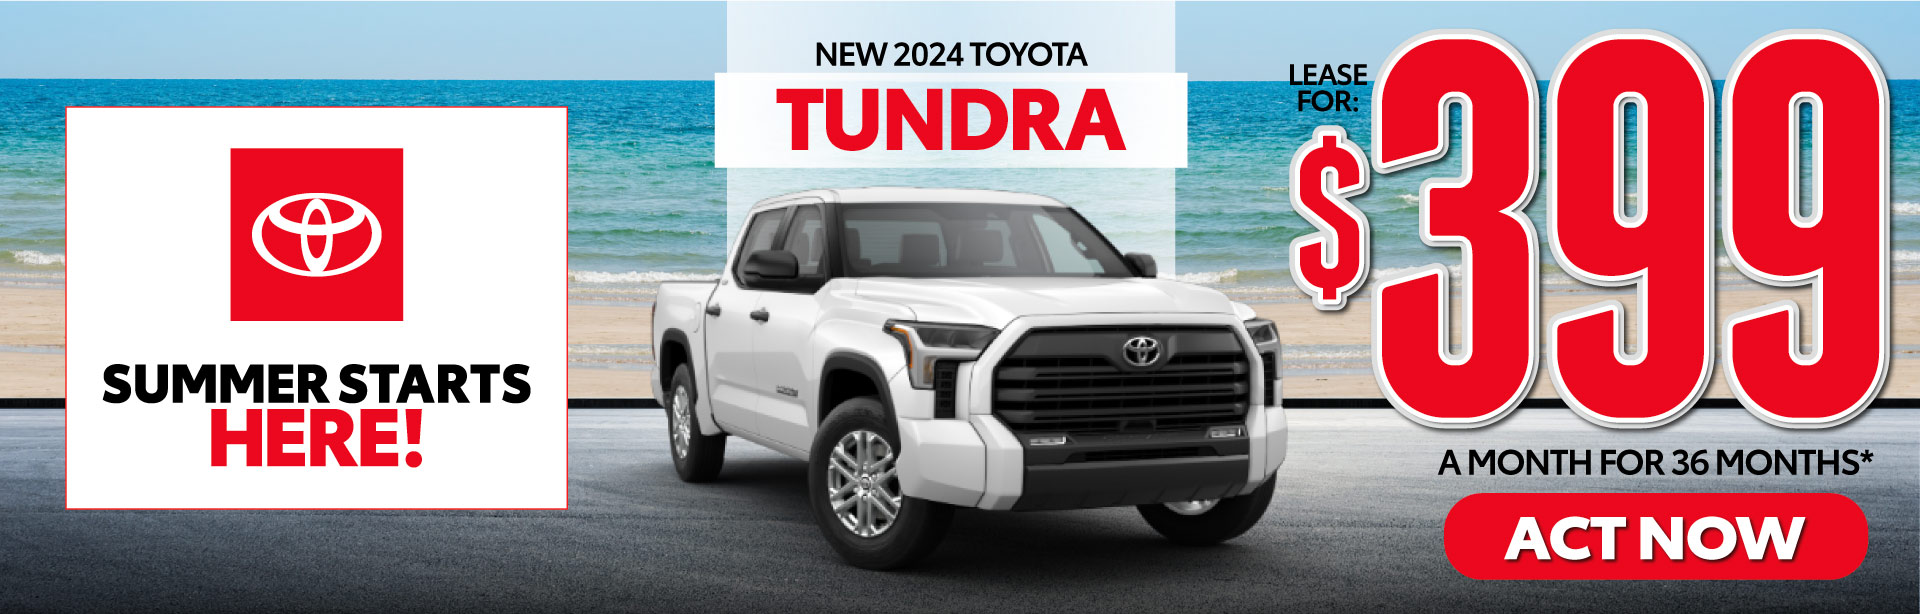 New 2024 Toyota Tundra, Camry, Corolla, Crown and Rav4 - 2.99% APR* | Act Now